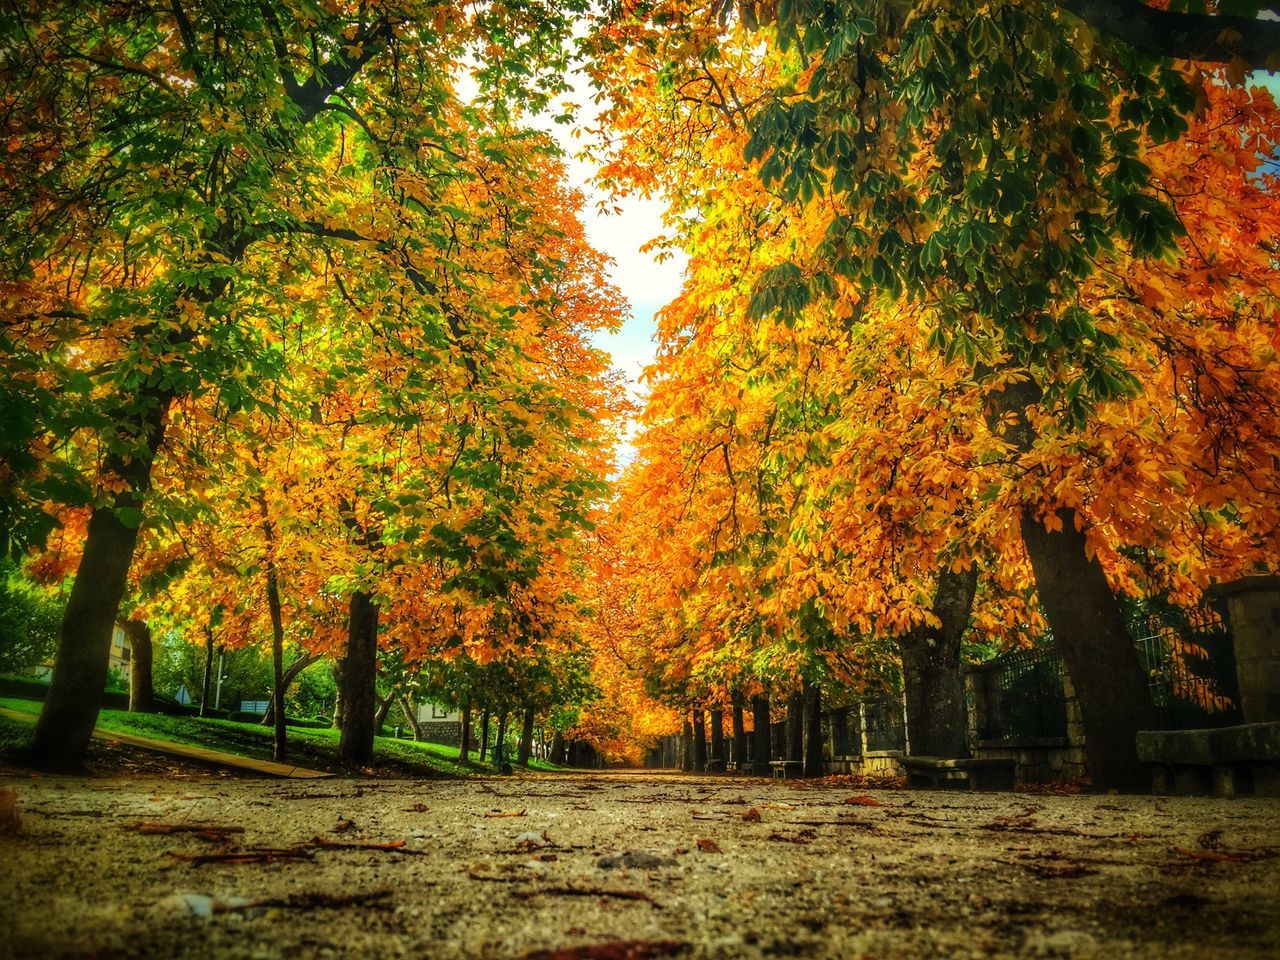 autumn, tree, change, season, orange color, yellow, tranquility, beauty in nature, growth, nature, branch, tranquil scene, scenics, leaf, park - man made space, outdoors, day, no people, sunlight, field